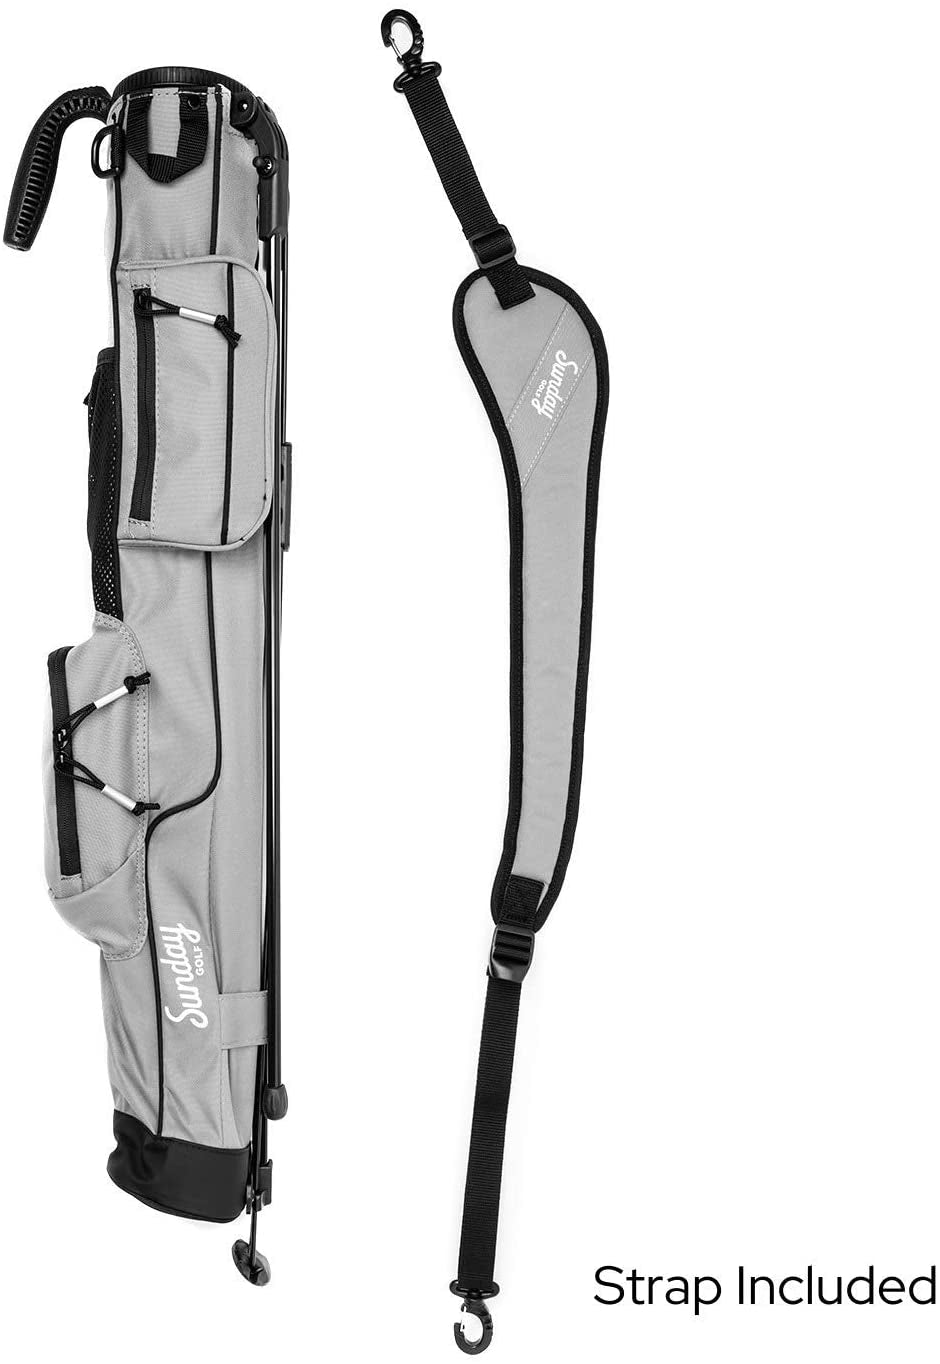 "Premium Stand Bag - The Ideal Lightweight and Durable Golfing Companion for On-the-Go Excellence!"